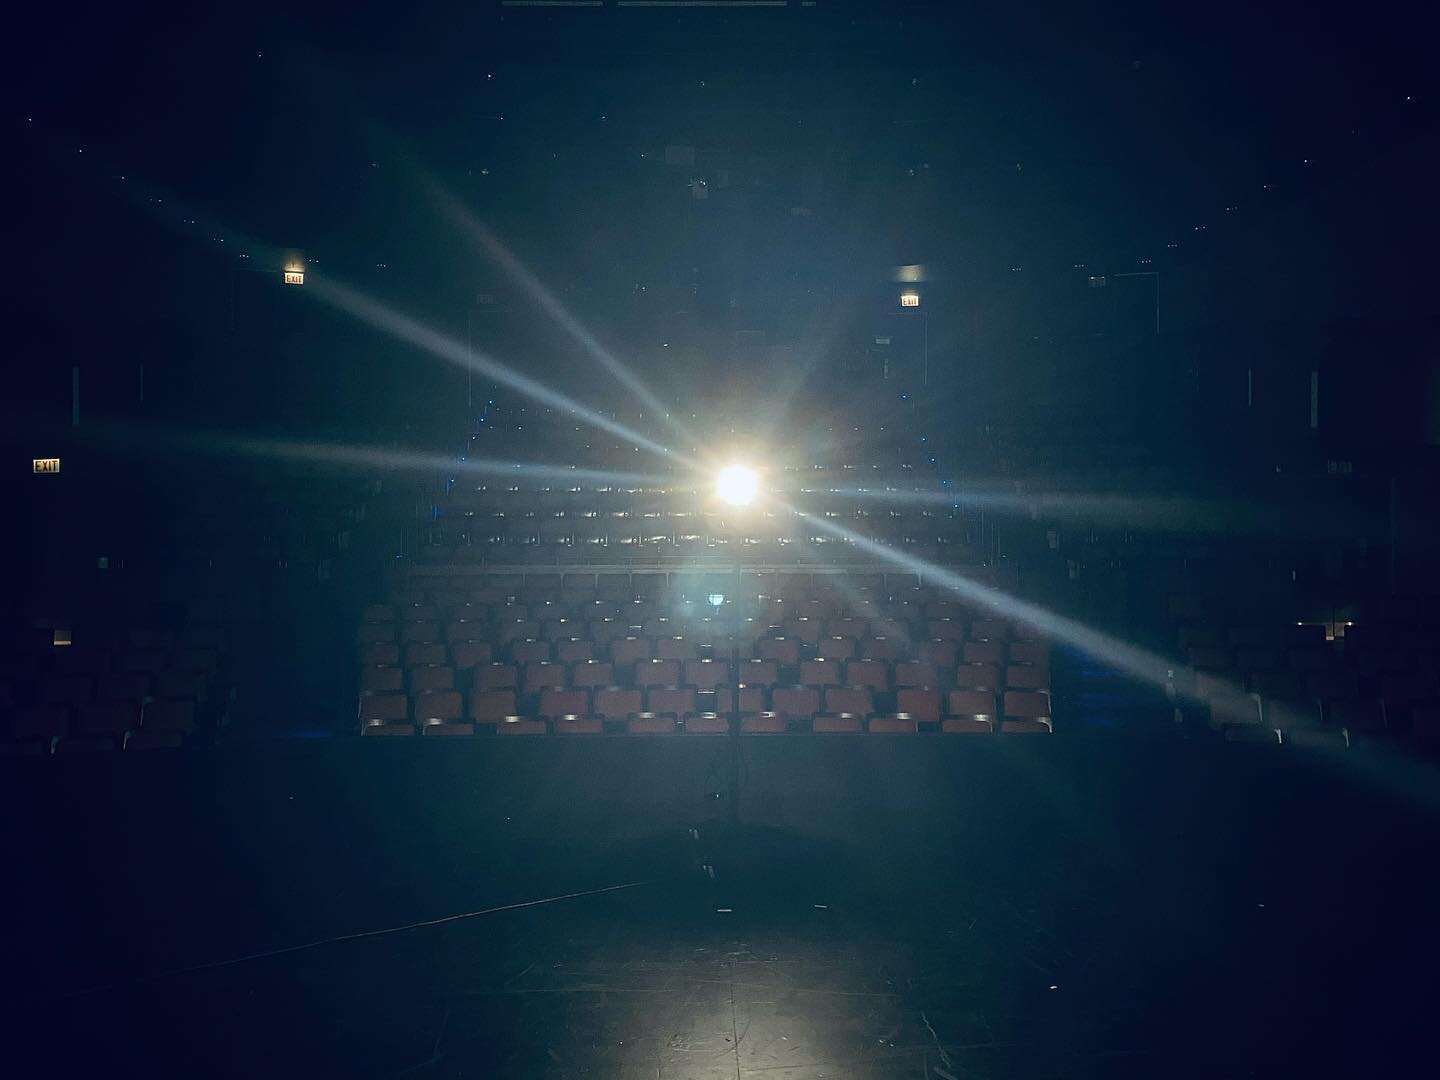 Last day of classes at @cmudrama !  It&rsquo;s been quite a year... our students and colleagues have made it through&mdash; a little tougher, a little wiser, and a lot more compassionate. 

See you this fall&mdash; we&rsquo;ll leave the light on for 